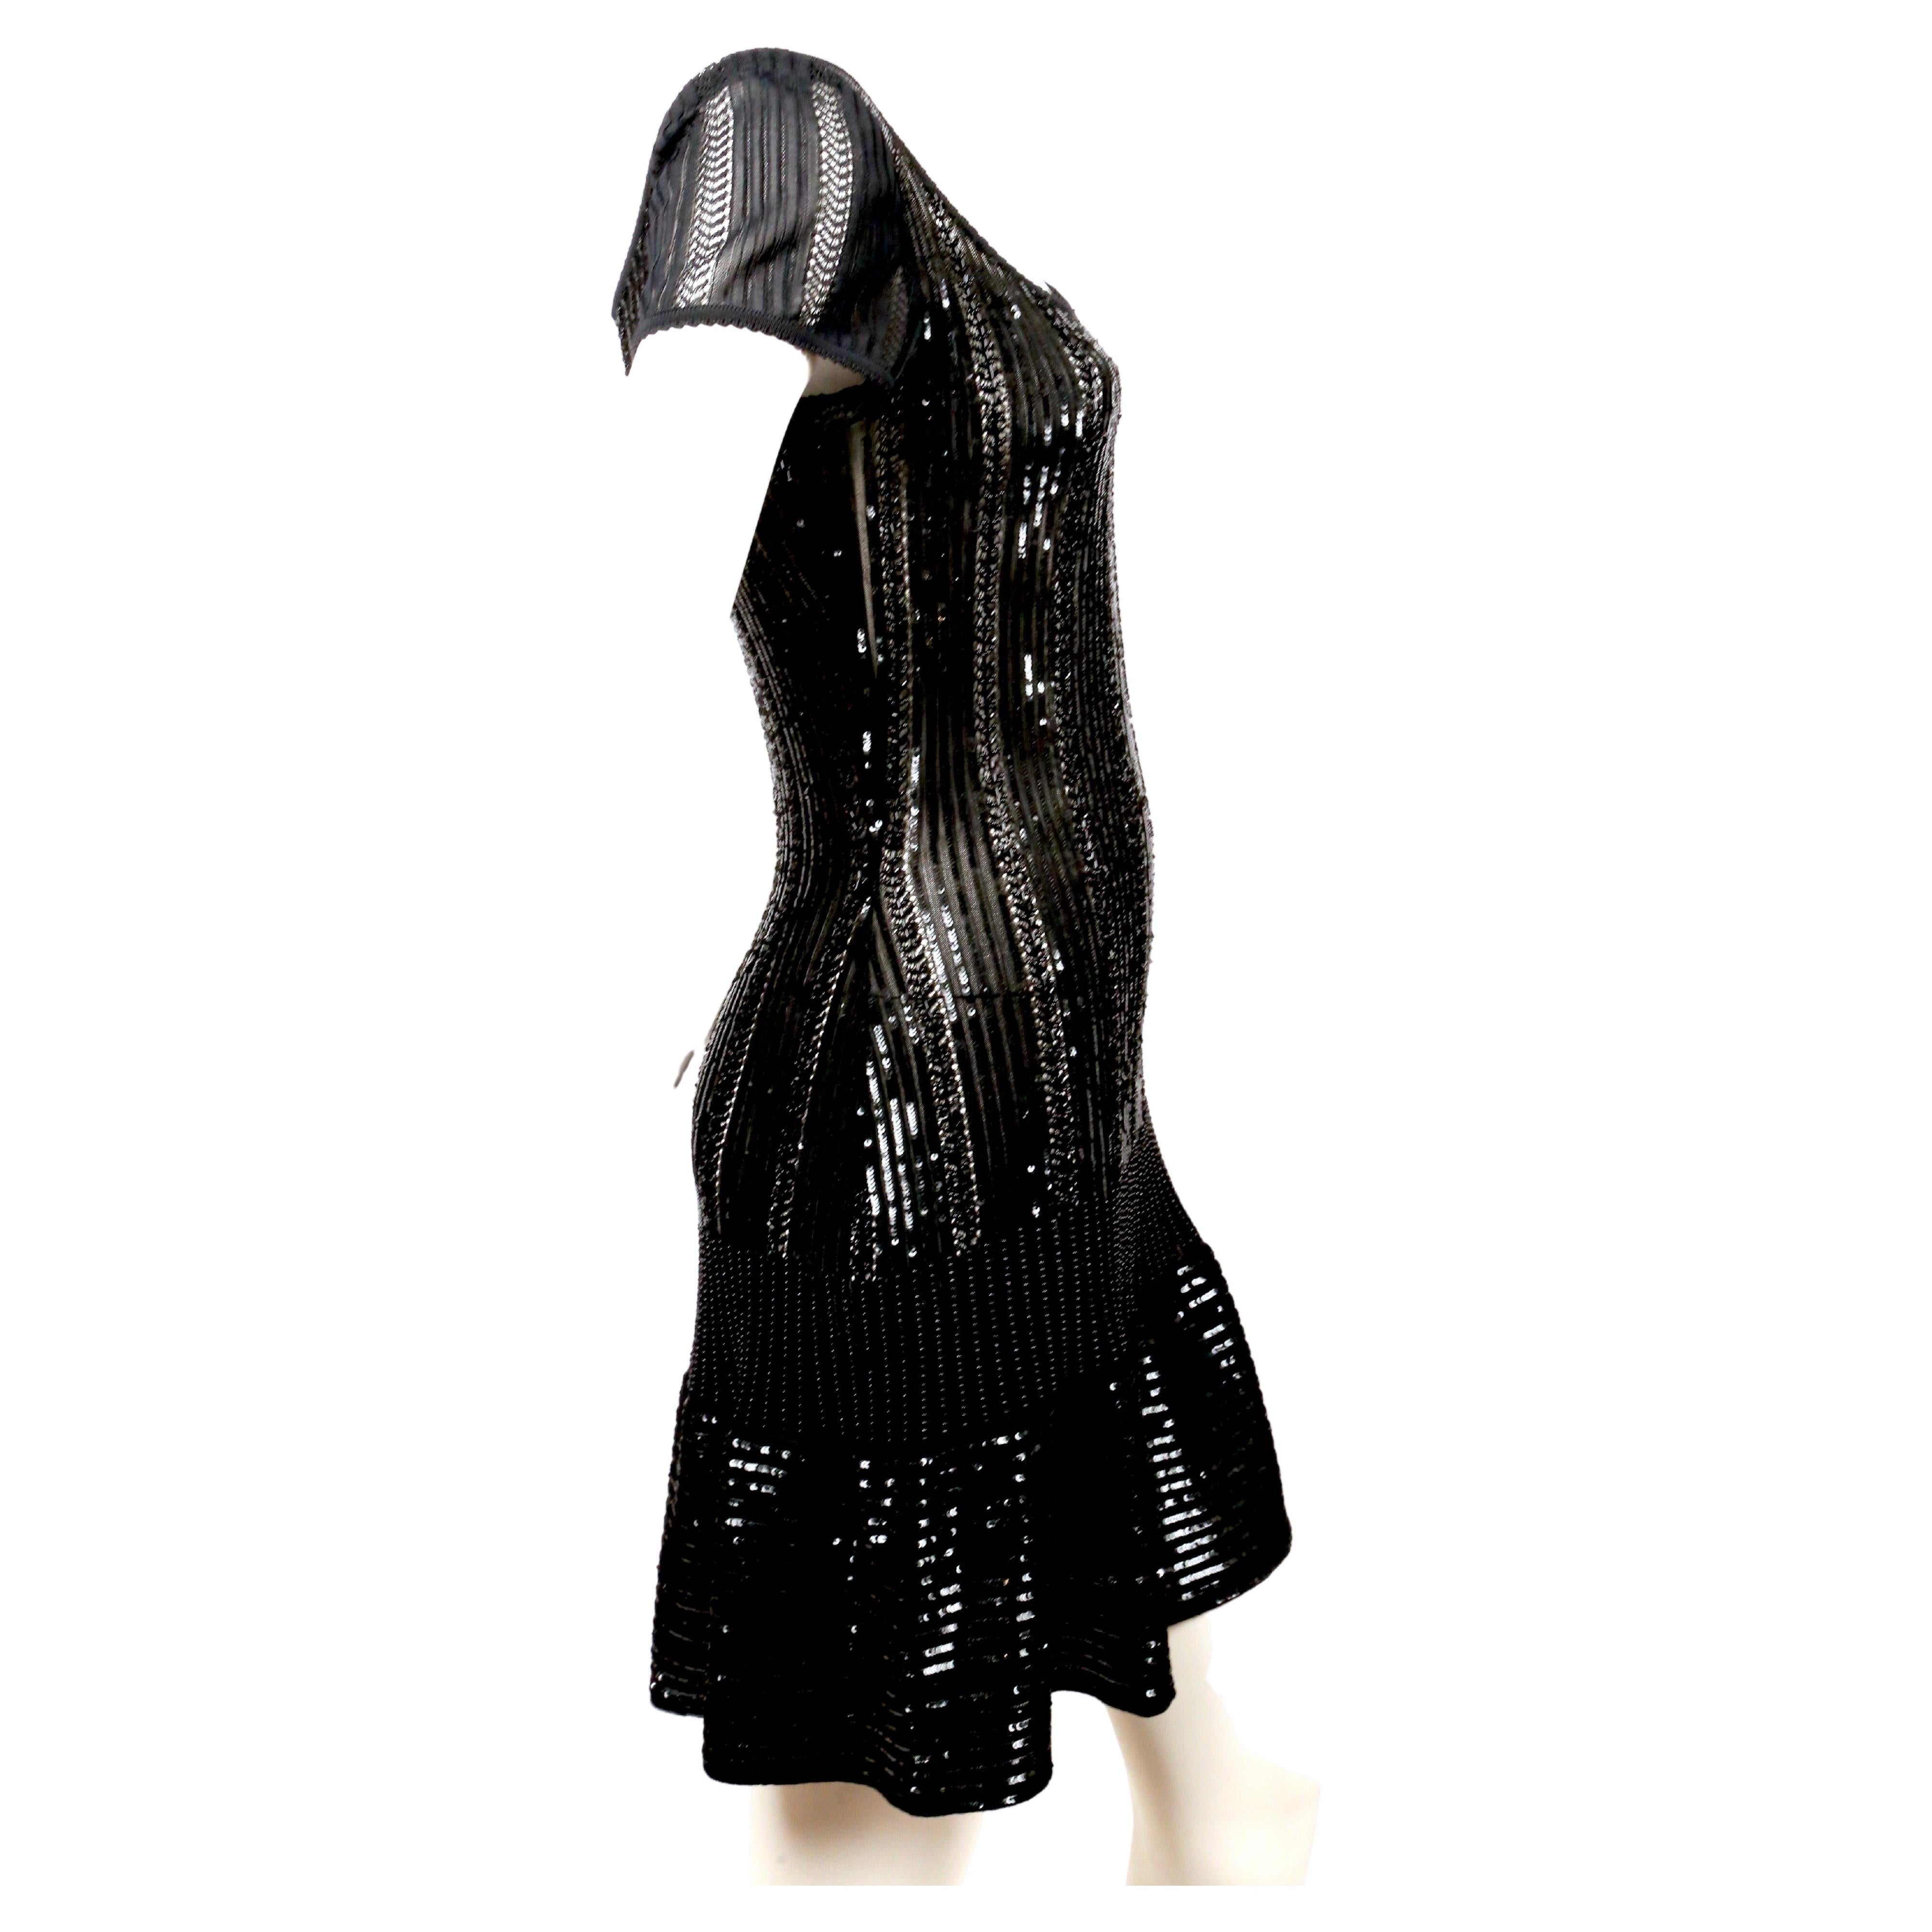 Jet-black beaded and micro-sequined mini dress designed by Azzedine Alaia dating to spring of 1996. Dress is labeled a size S. Length is approximately 33